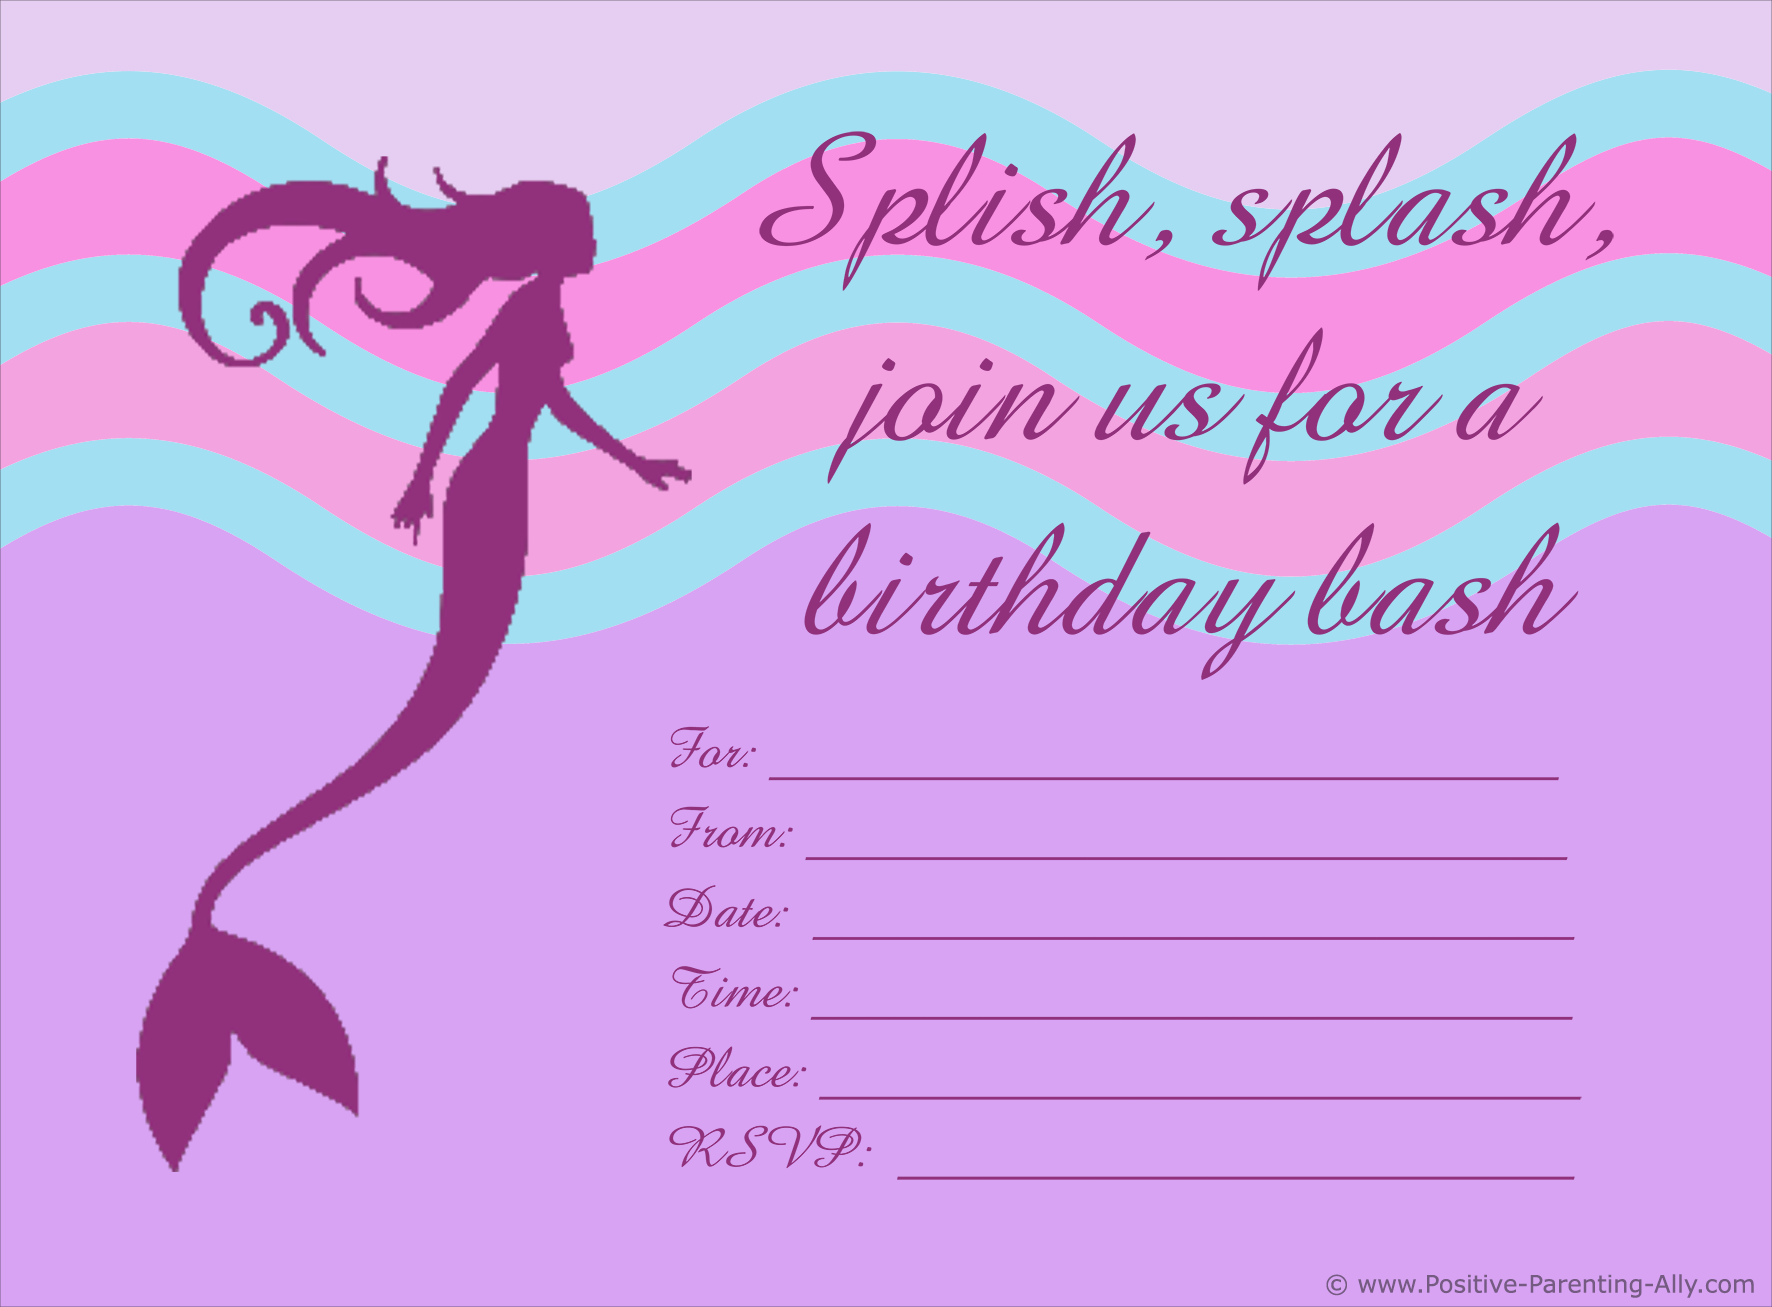 Printable birthday party invitations with a mermaid in pink colors.